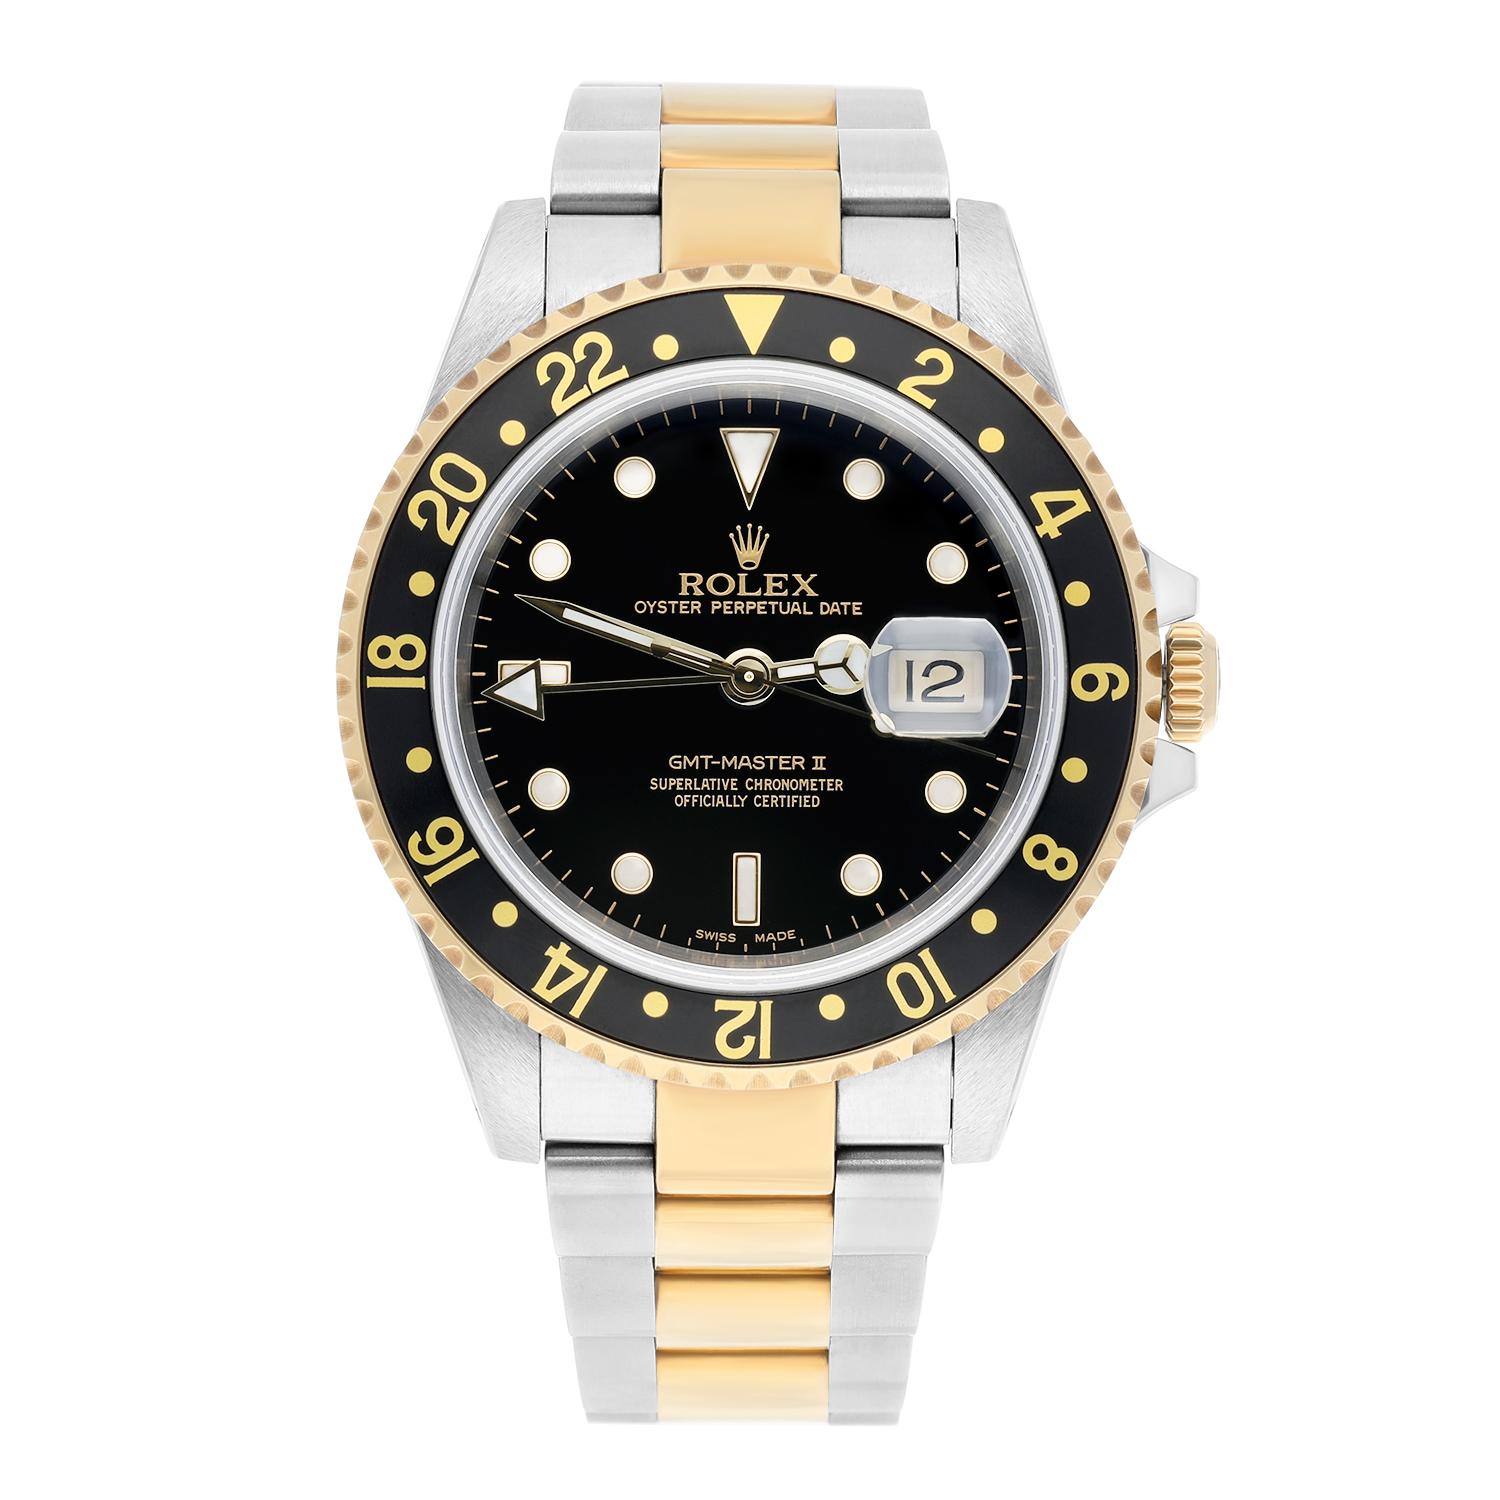 The Rolex Men's GMT-Master II 16713 is a timeless blend of luxury and functionality, featuring a striking 18K gold and stainless steel construction. With its iconic black dial and 40mm size, this vintage timepiece exudes classic elegance. Watch in